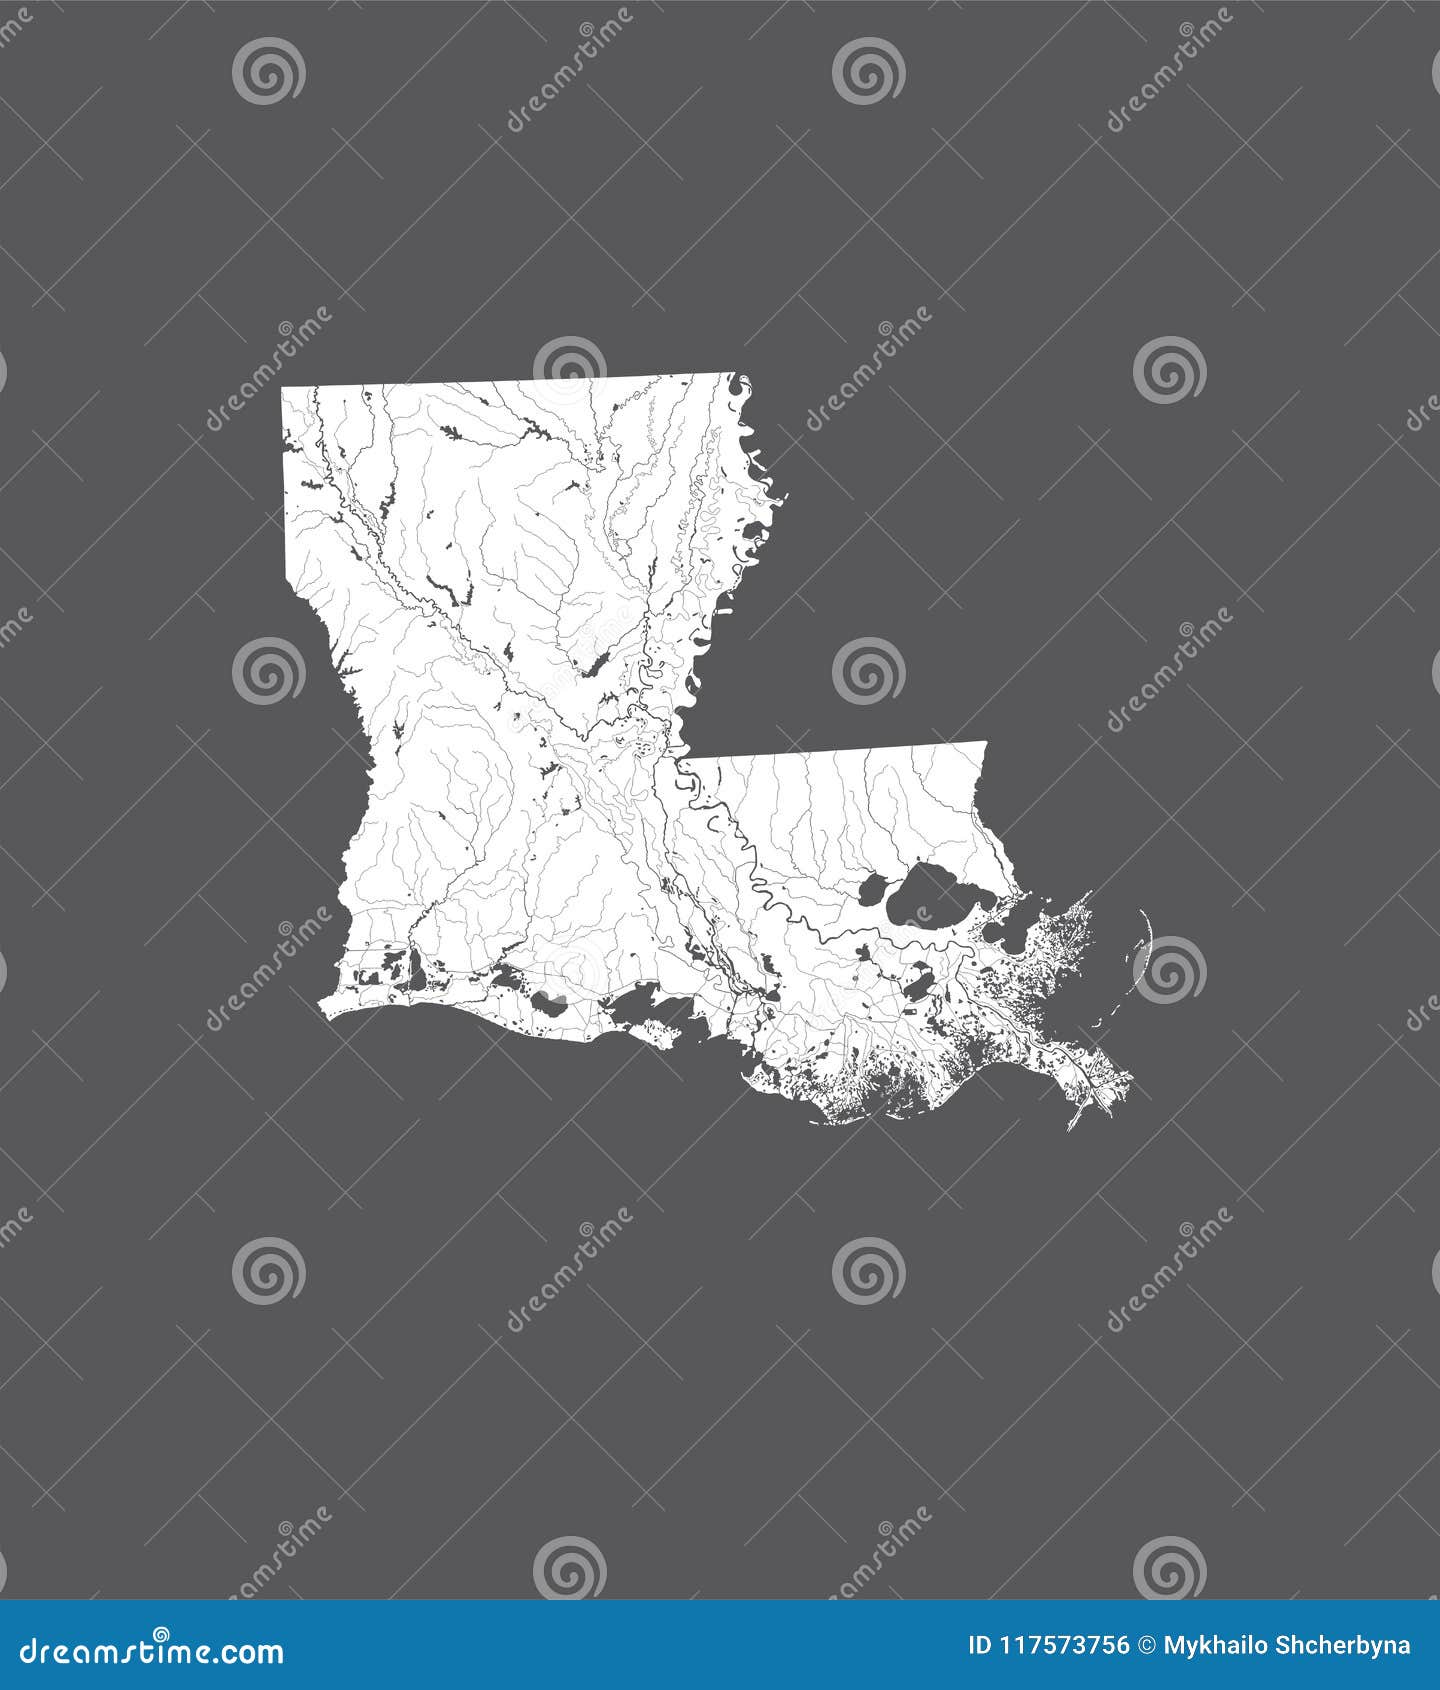 Map Of Louisiana With Lakes And Rivers. Stock Vector - Illustration of hydrography, lake: 117573756